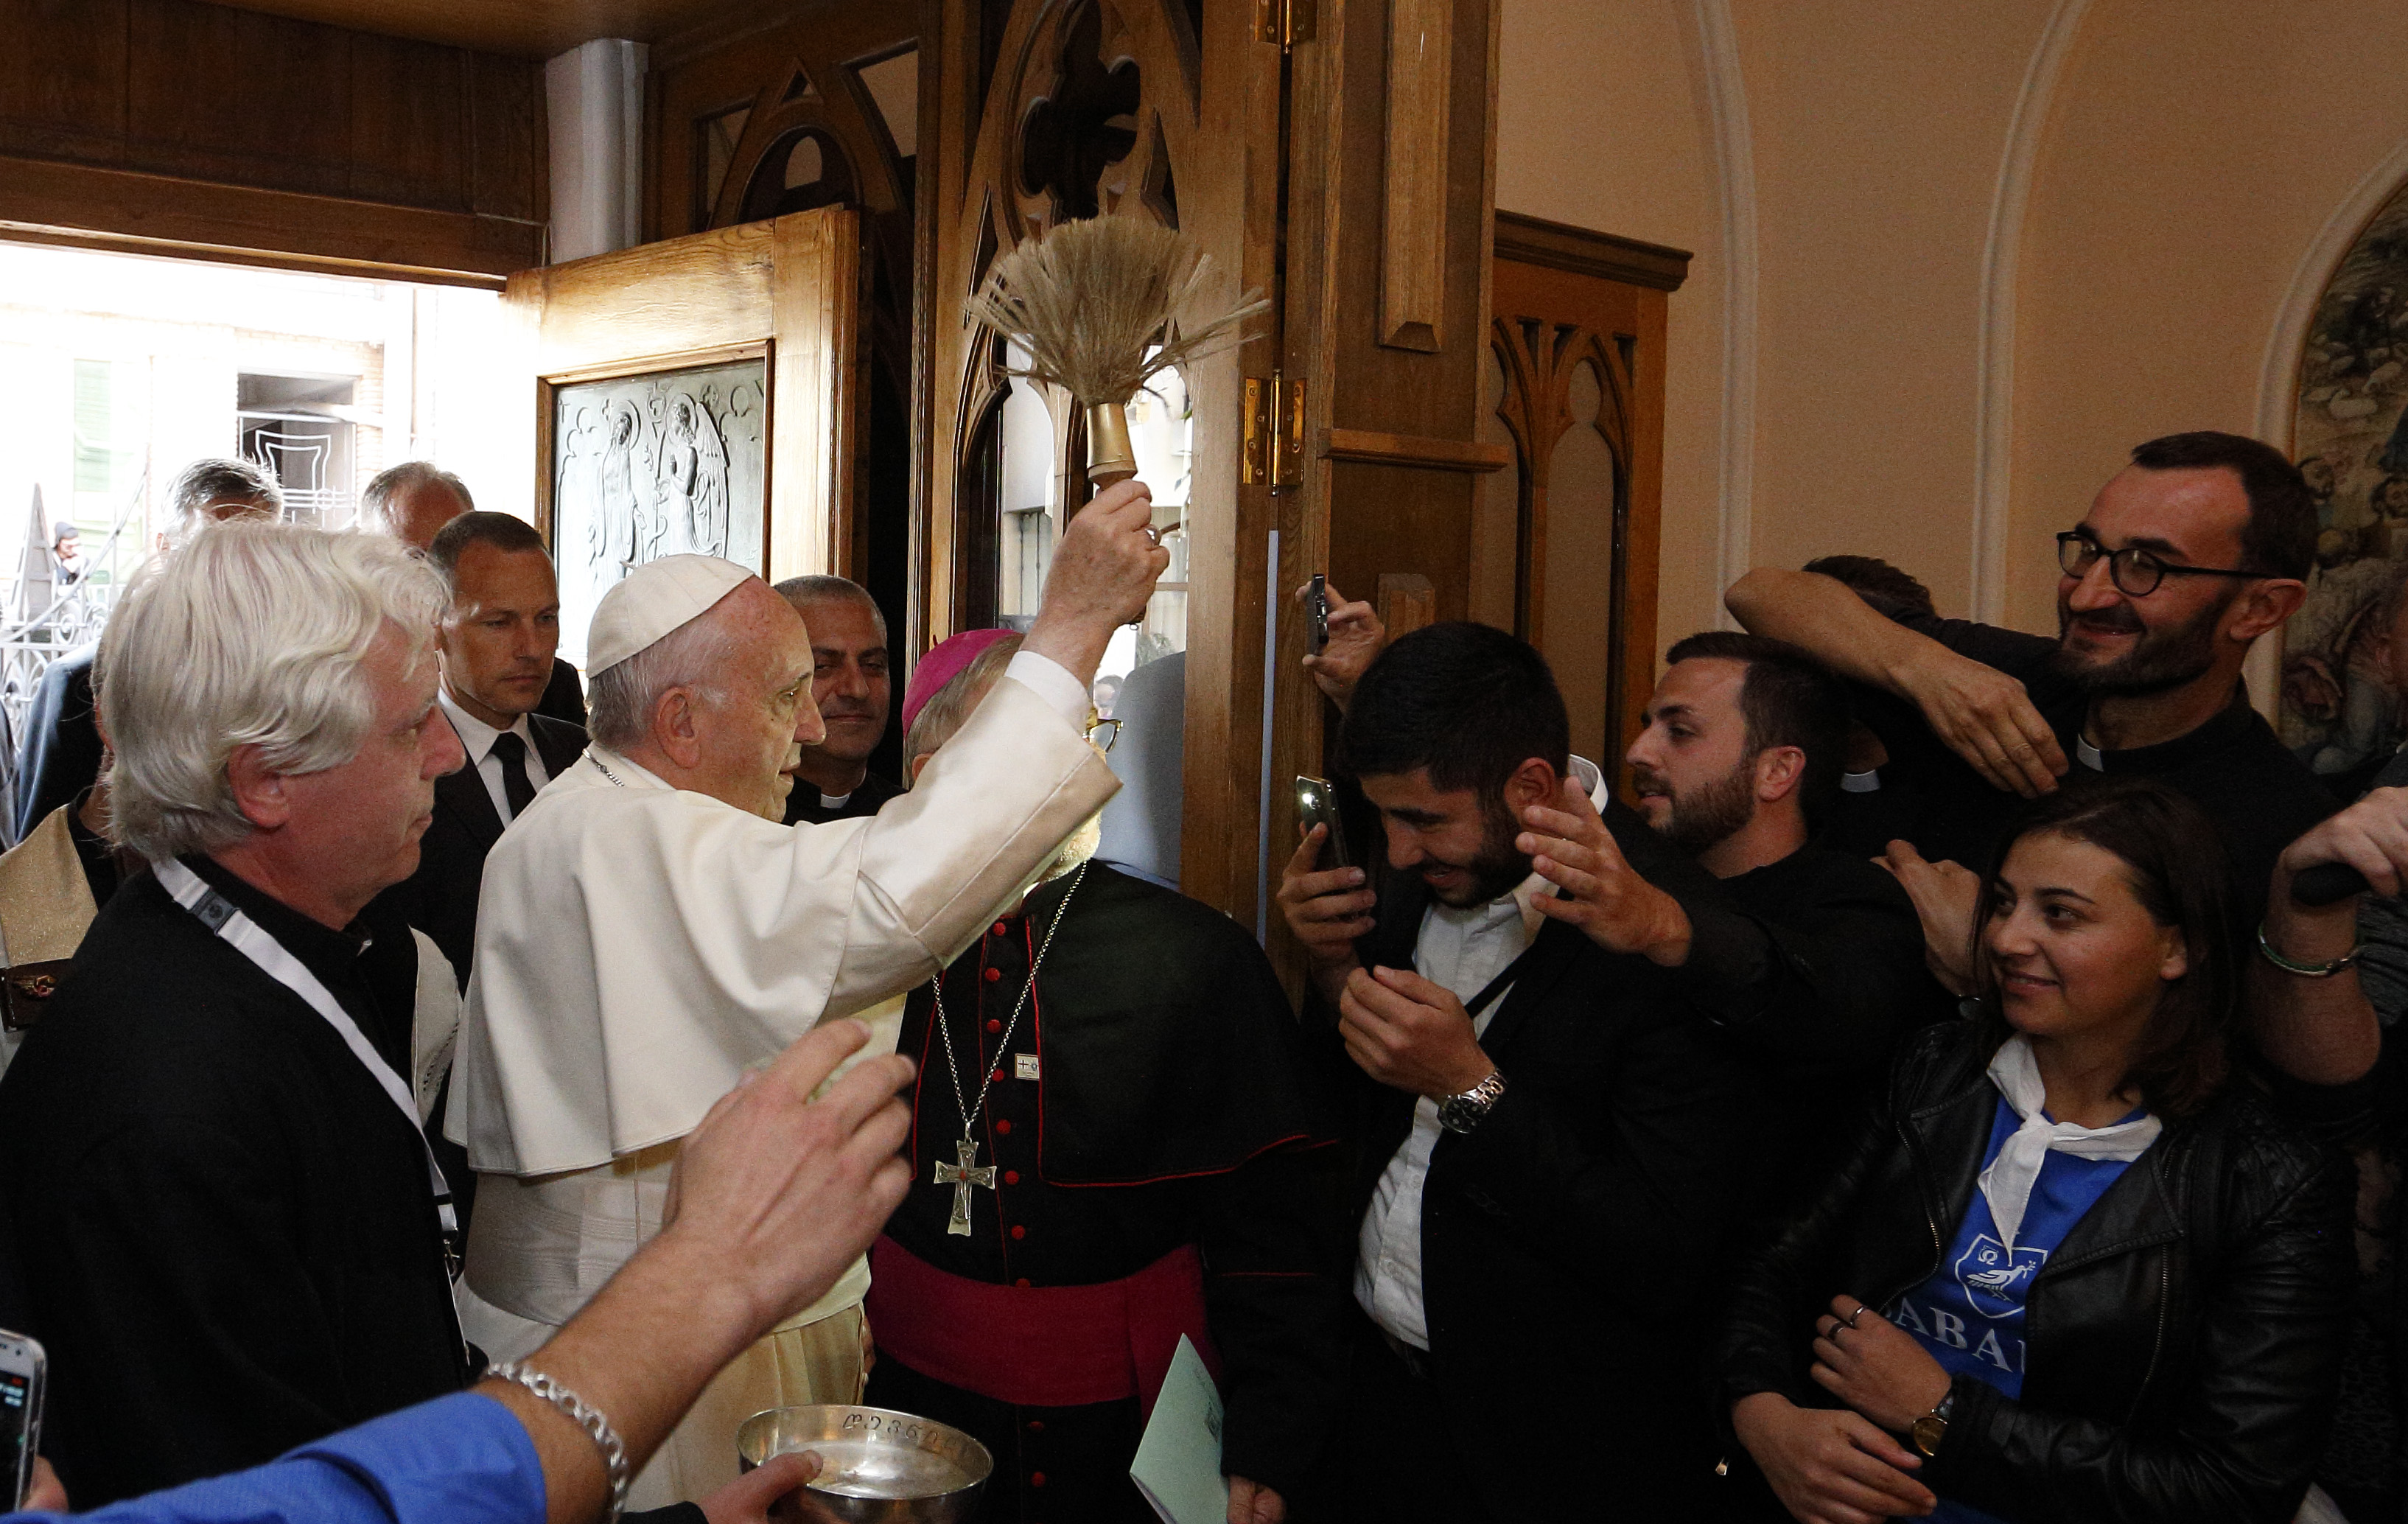 Pope Francis blesses people with holy water as he arrives for a meeting with priests, men and women religious, seminarians and pastoral workers at the Church of the Assumption in Tbilisi, Georgia, Oct. 1. (CNS photo/Paul Haring)